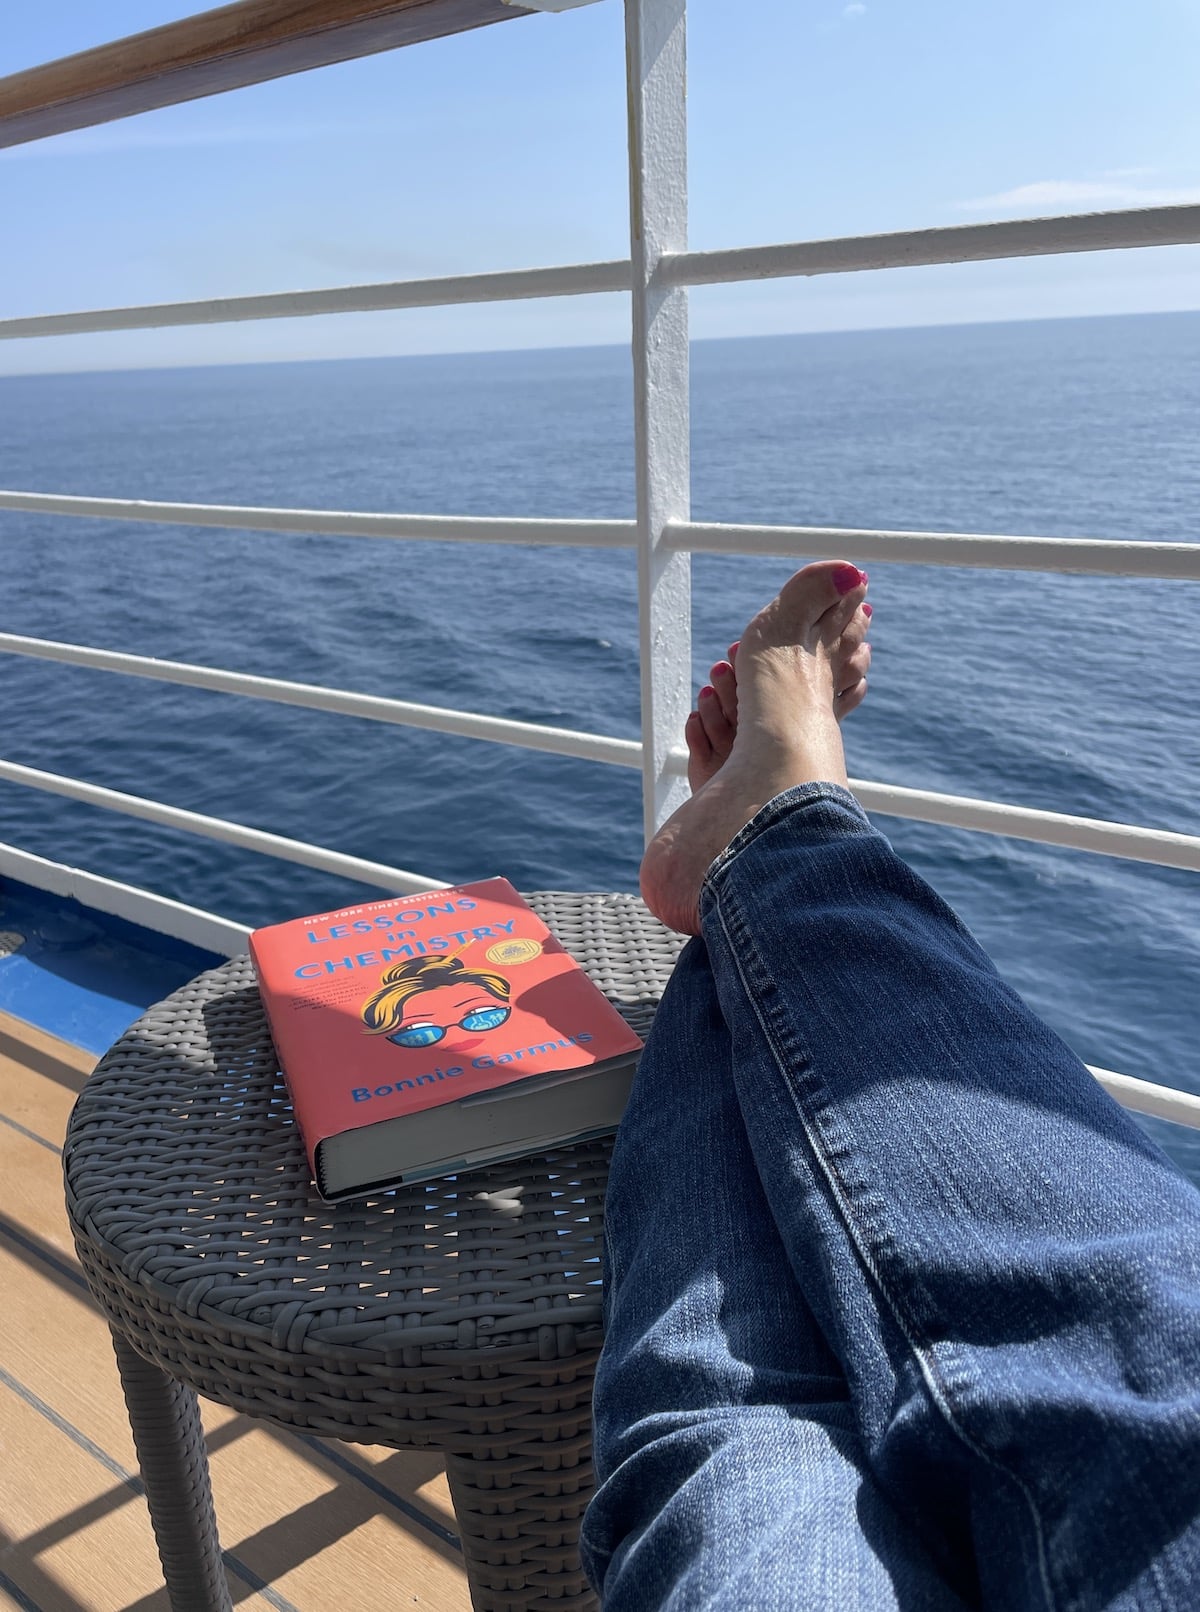 Legs resting on small table with book overlooking sea on cruise ship.